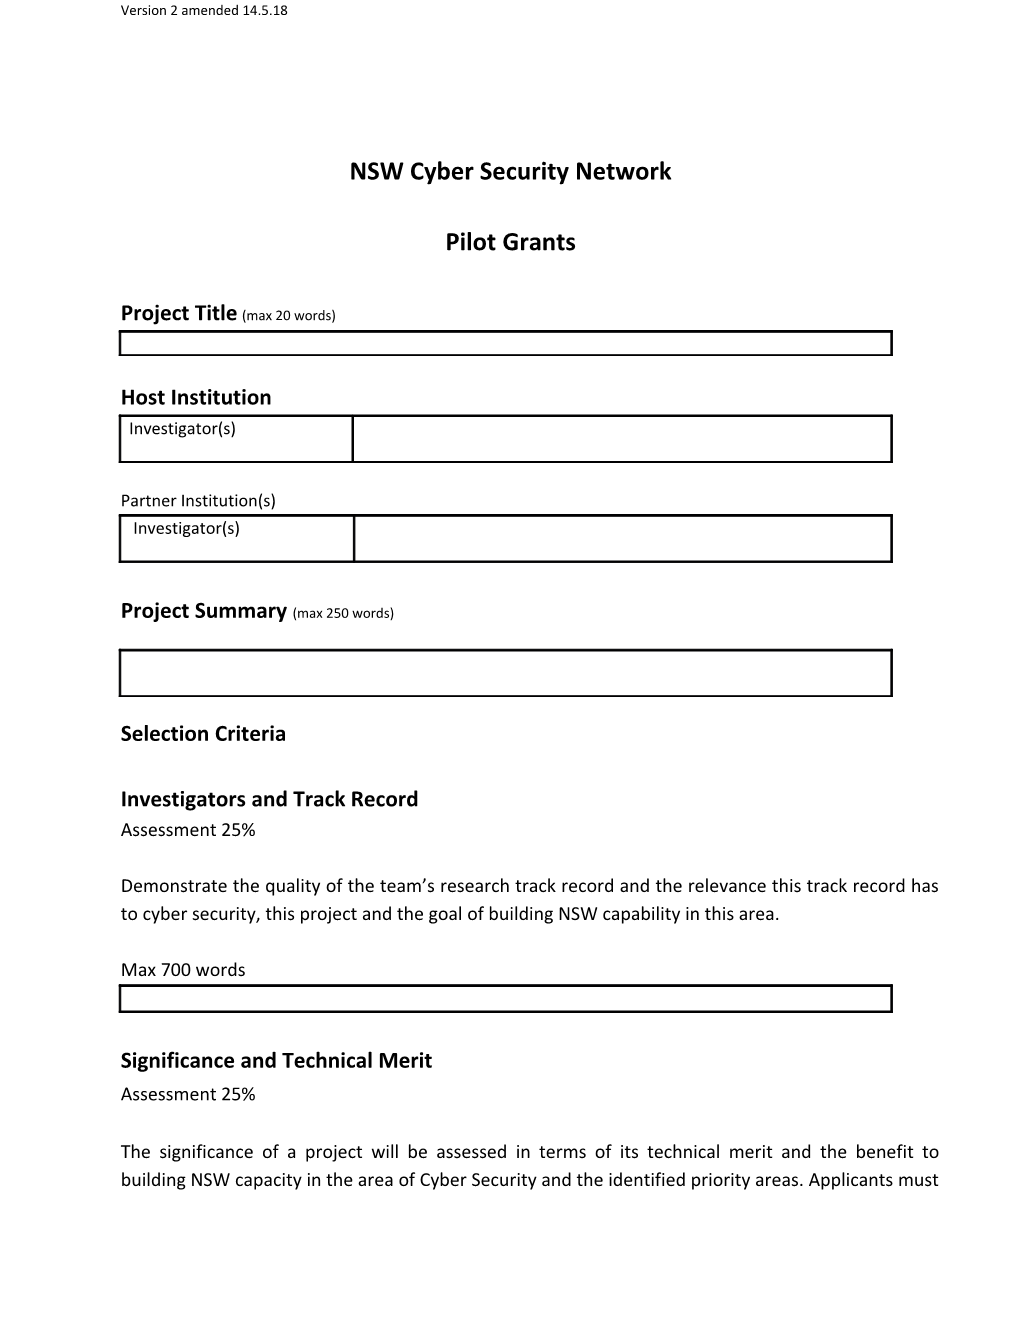 NSW Cyber Security Network